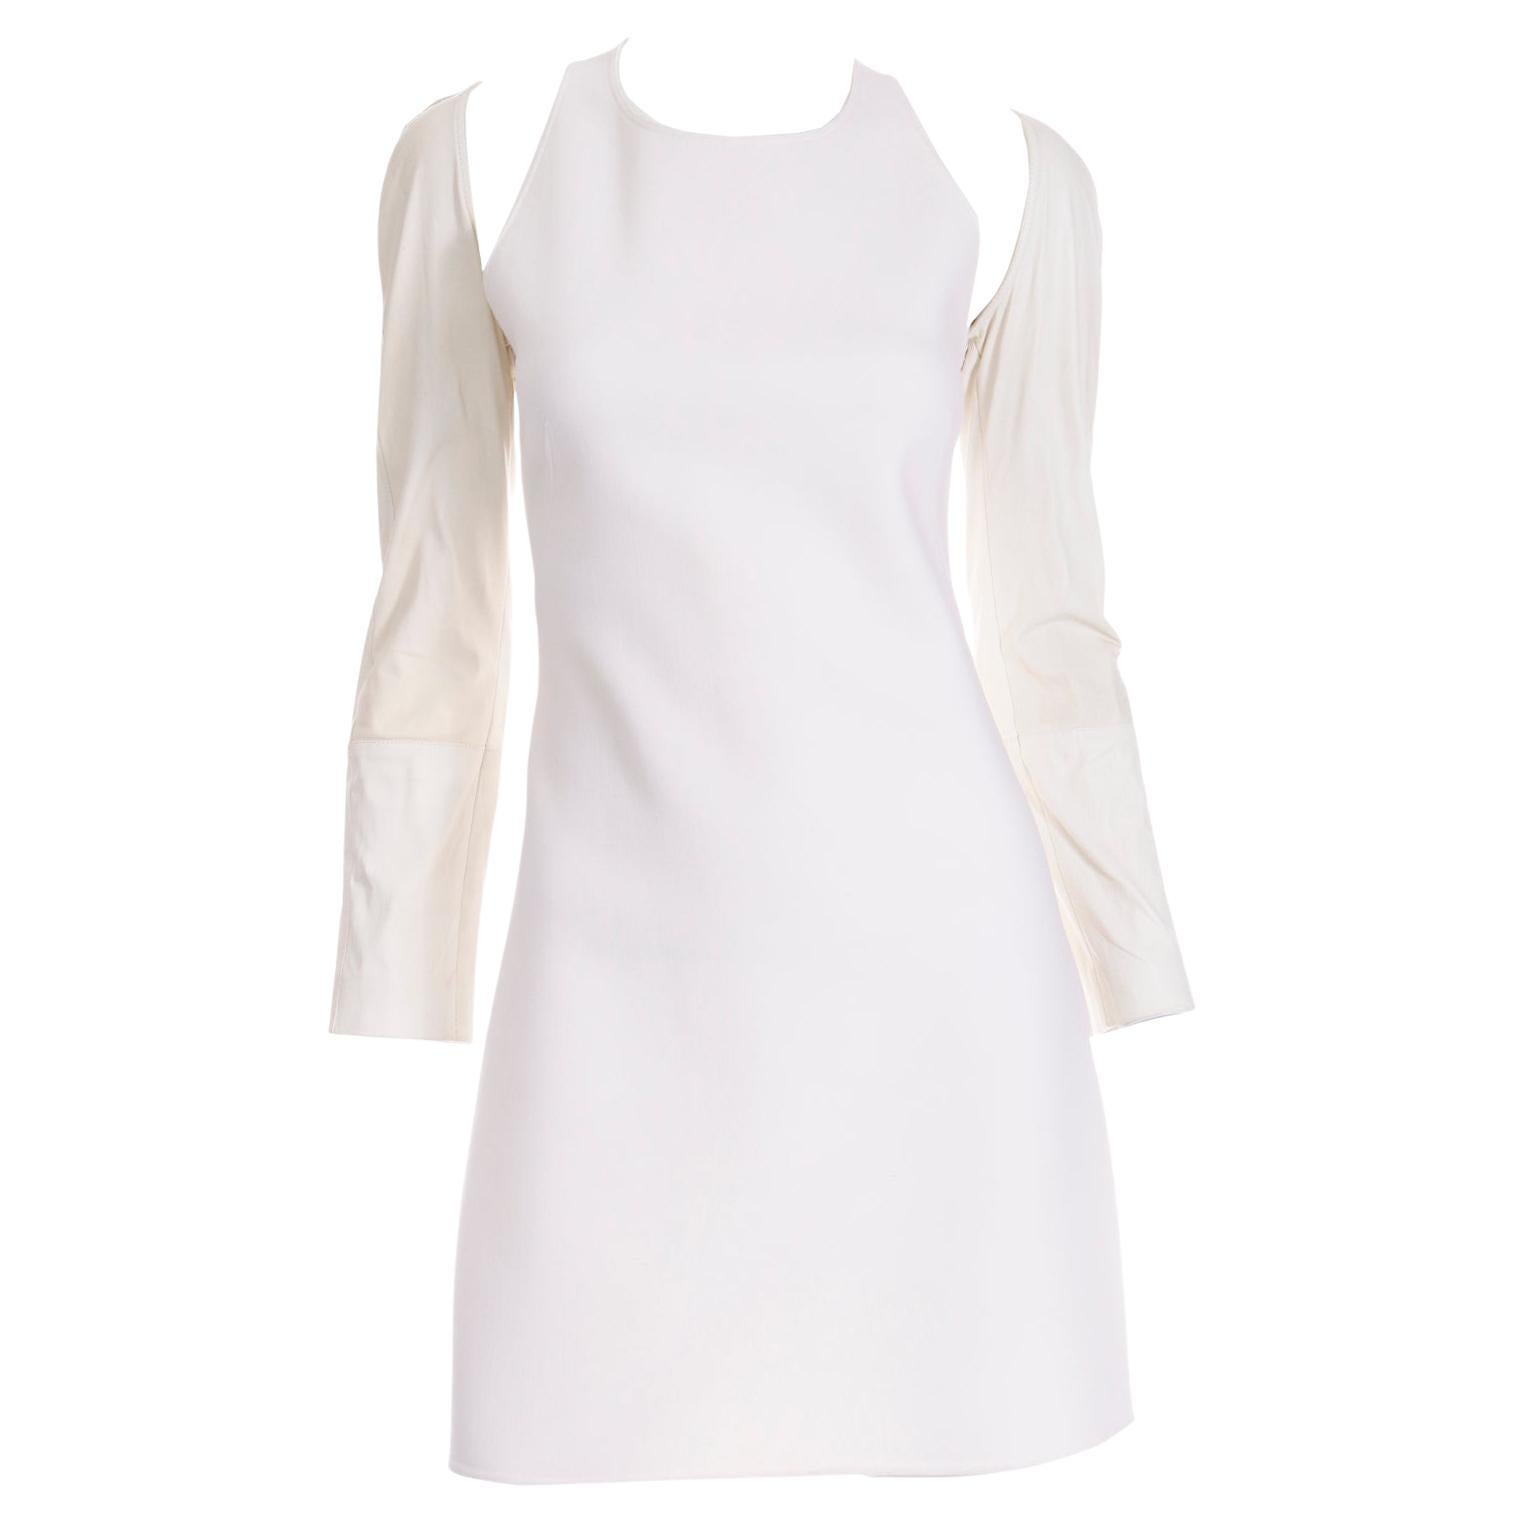 Kaufmanfranco Ivory Crepe Cutout Dress With Cream Lambskin Leather Sleeves